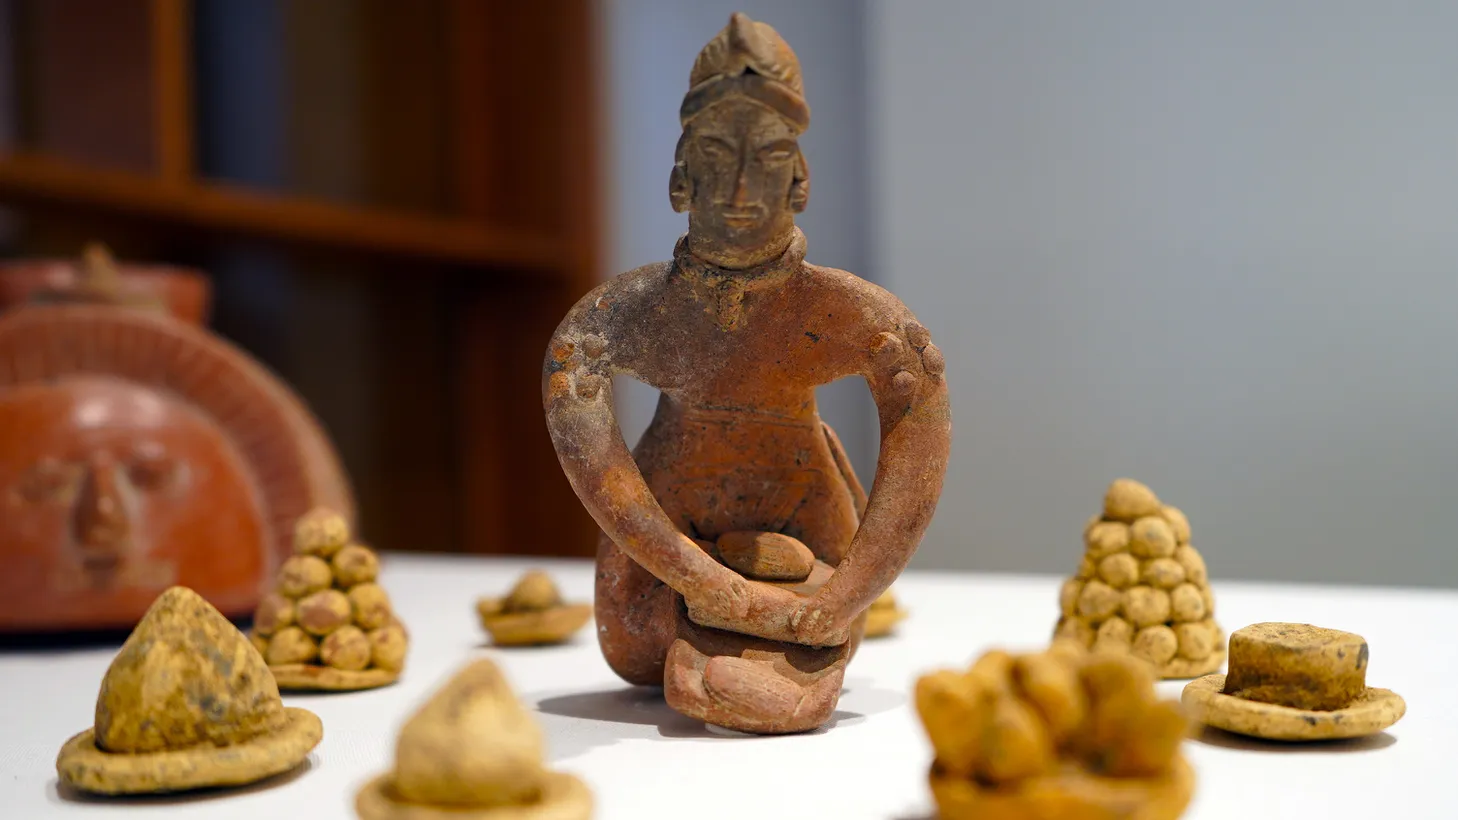 An artifact from Oaxaca, Mexico on display at LA Cocina features a kneeling figure making masa with mano and metate, a stone grinding tool.